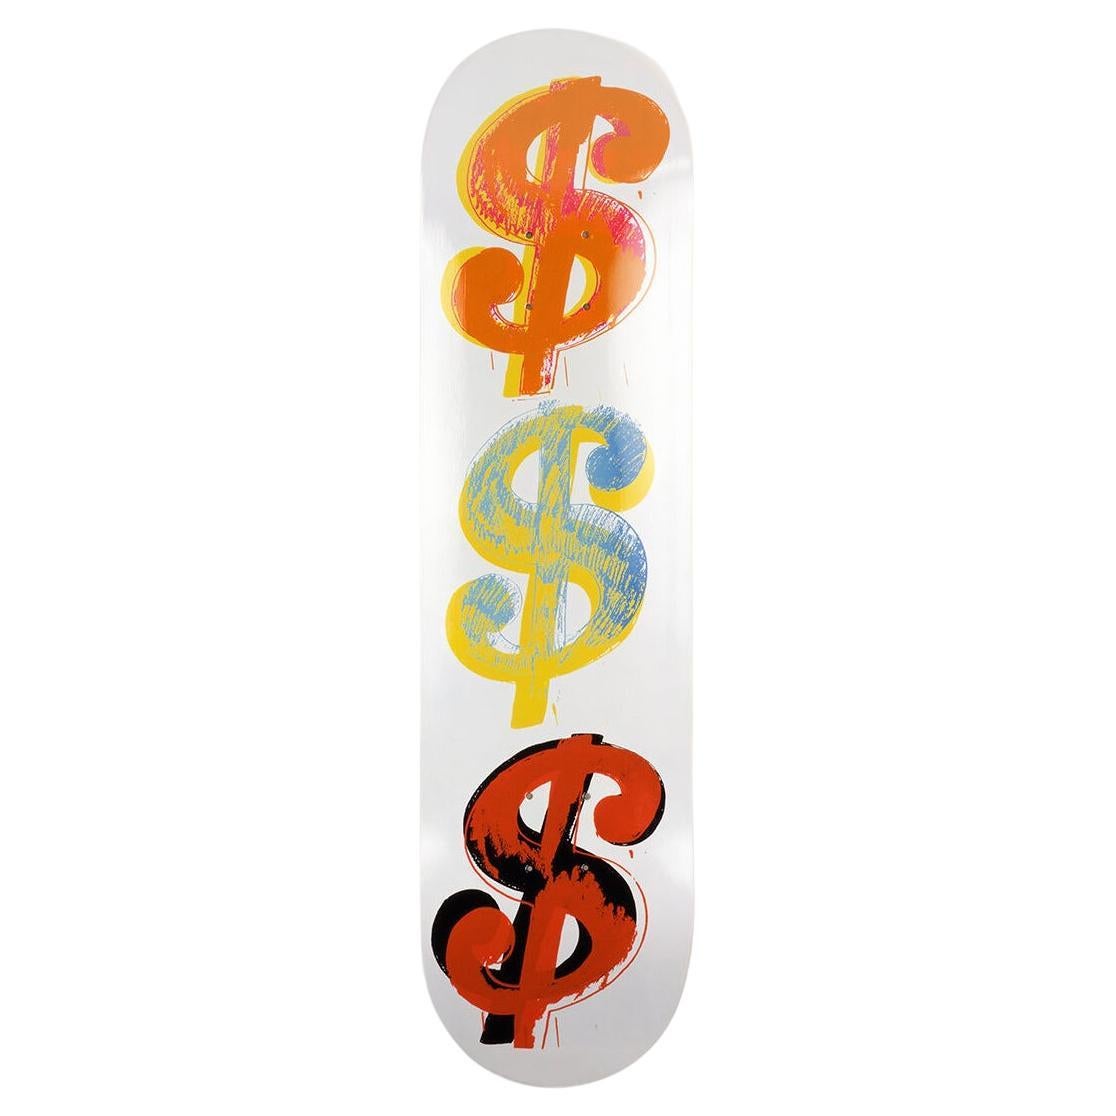 When was Dollar Sign made by Andy Warhol?